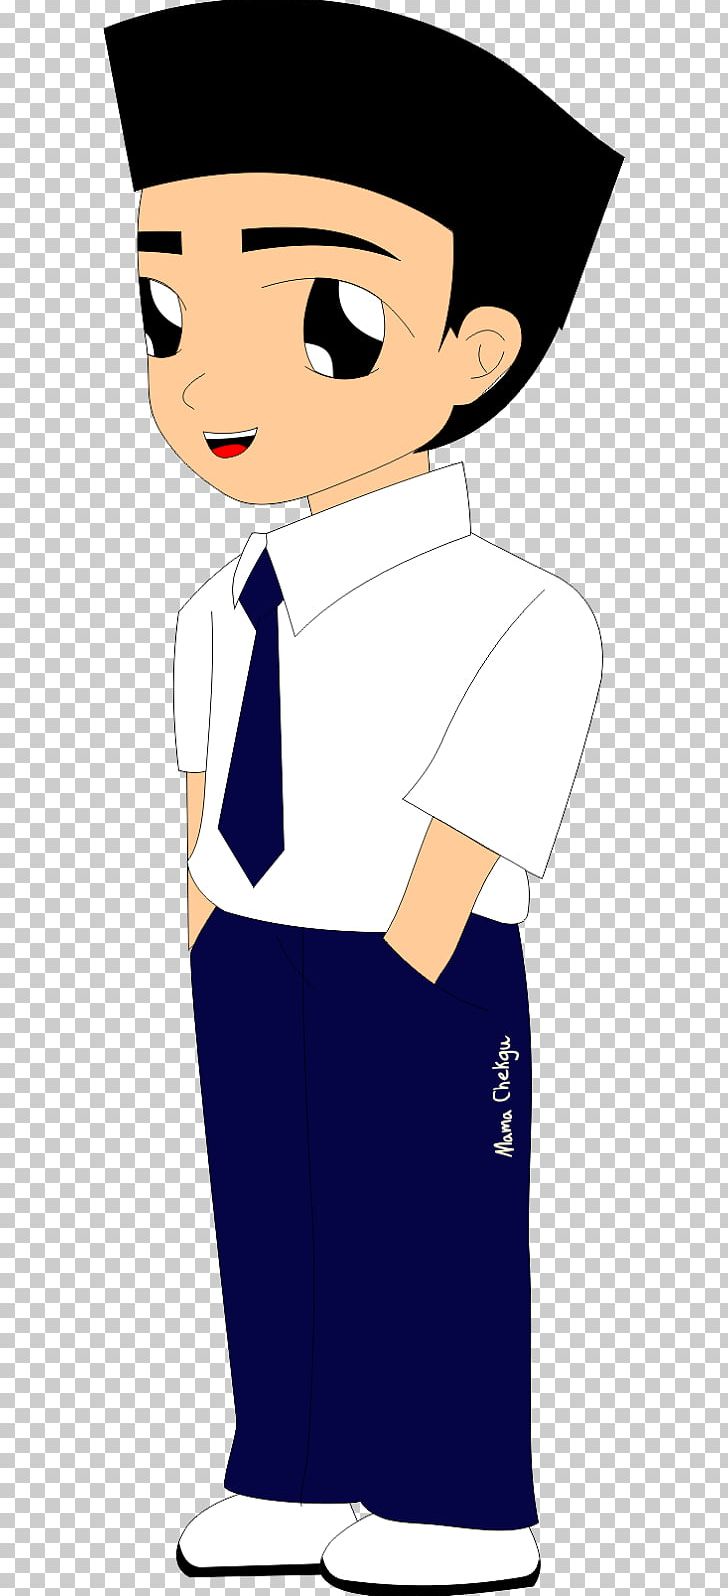 Student Maxwell School National Secondary School PNG, Clipart, Animaatio, Art, Cartoon, Clothing, Doodle Free PNG Download